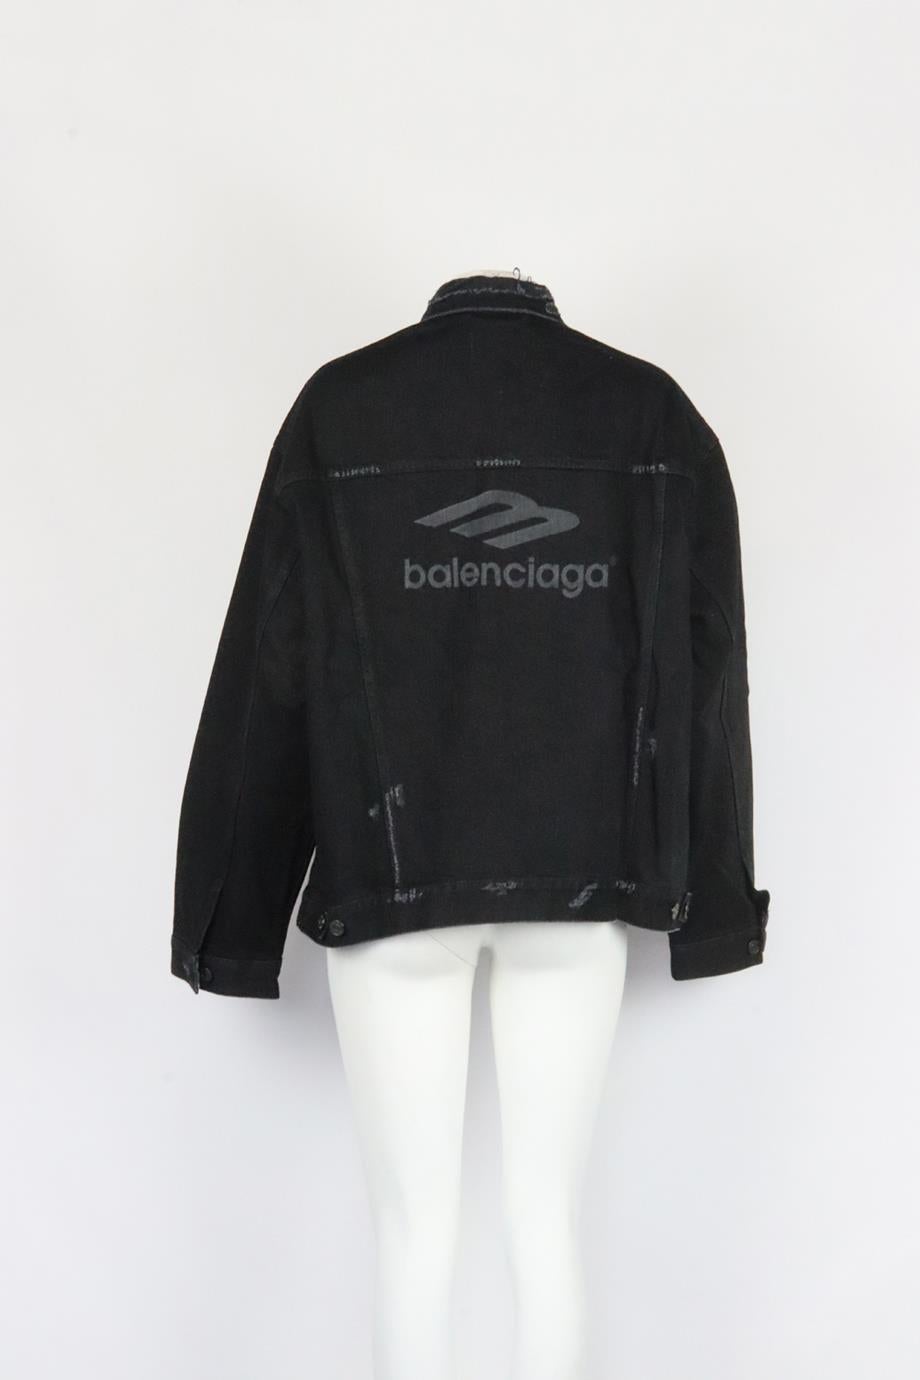 Balenciaga Oversized Printed Denim Jacket Xsmall In Excellent Condition In London, GB